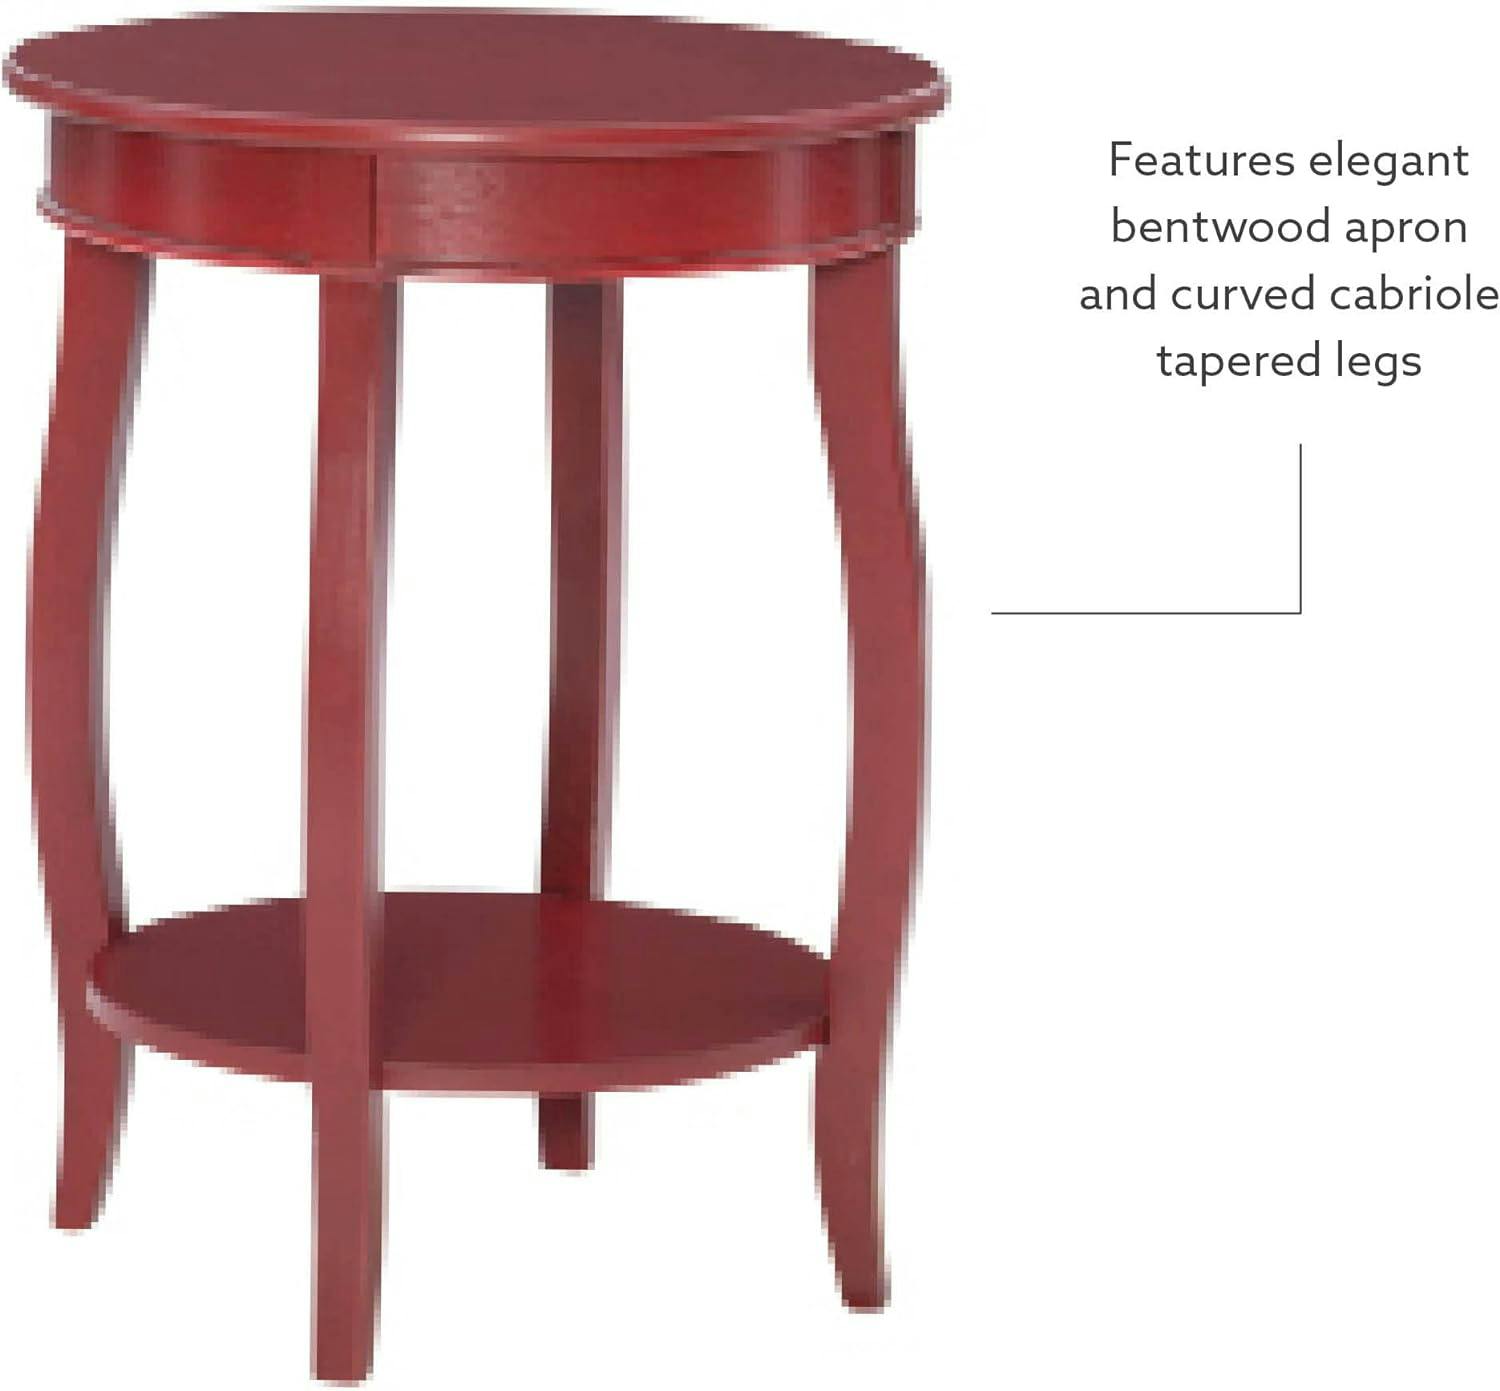 Contemporary Red Round Side Table with Lower Shelf